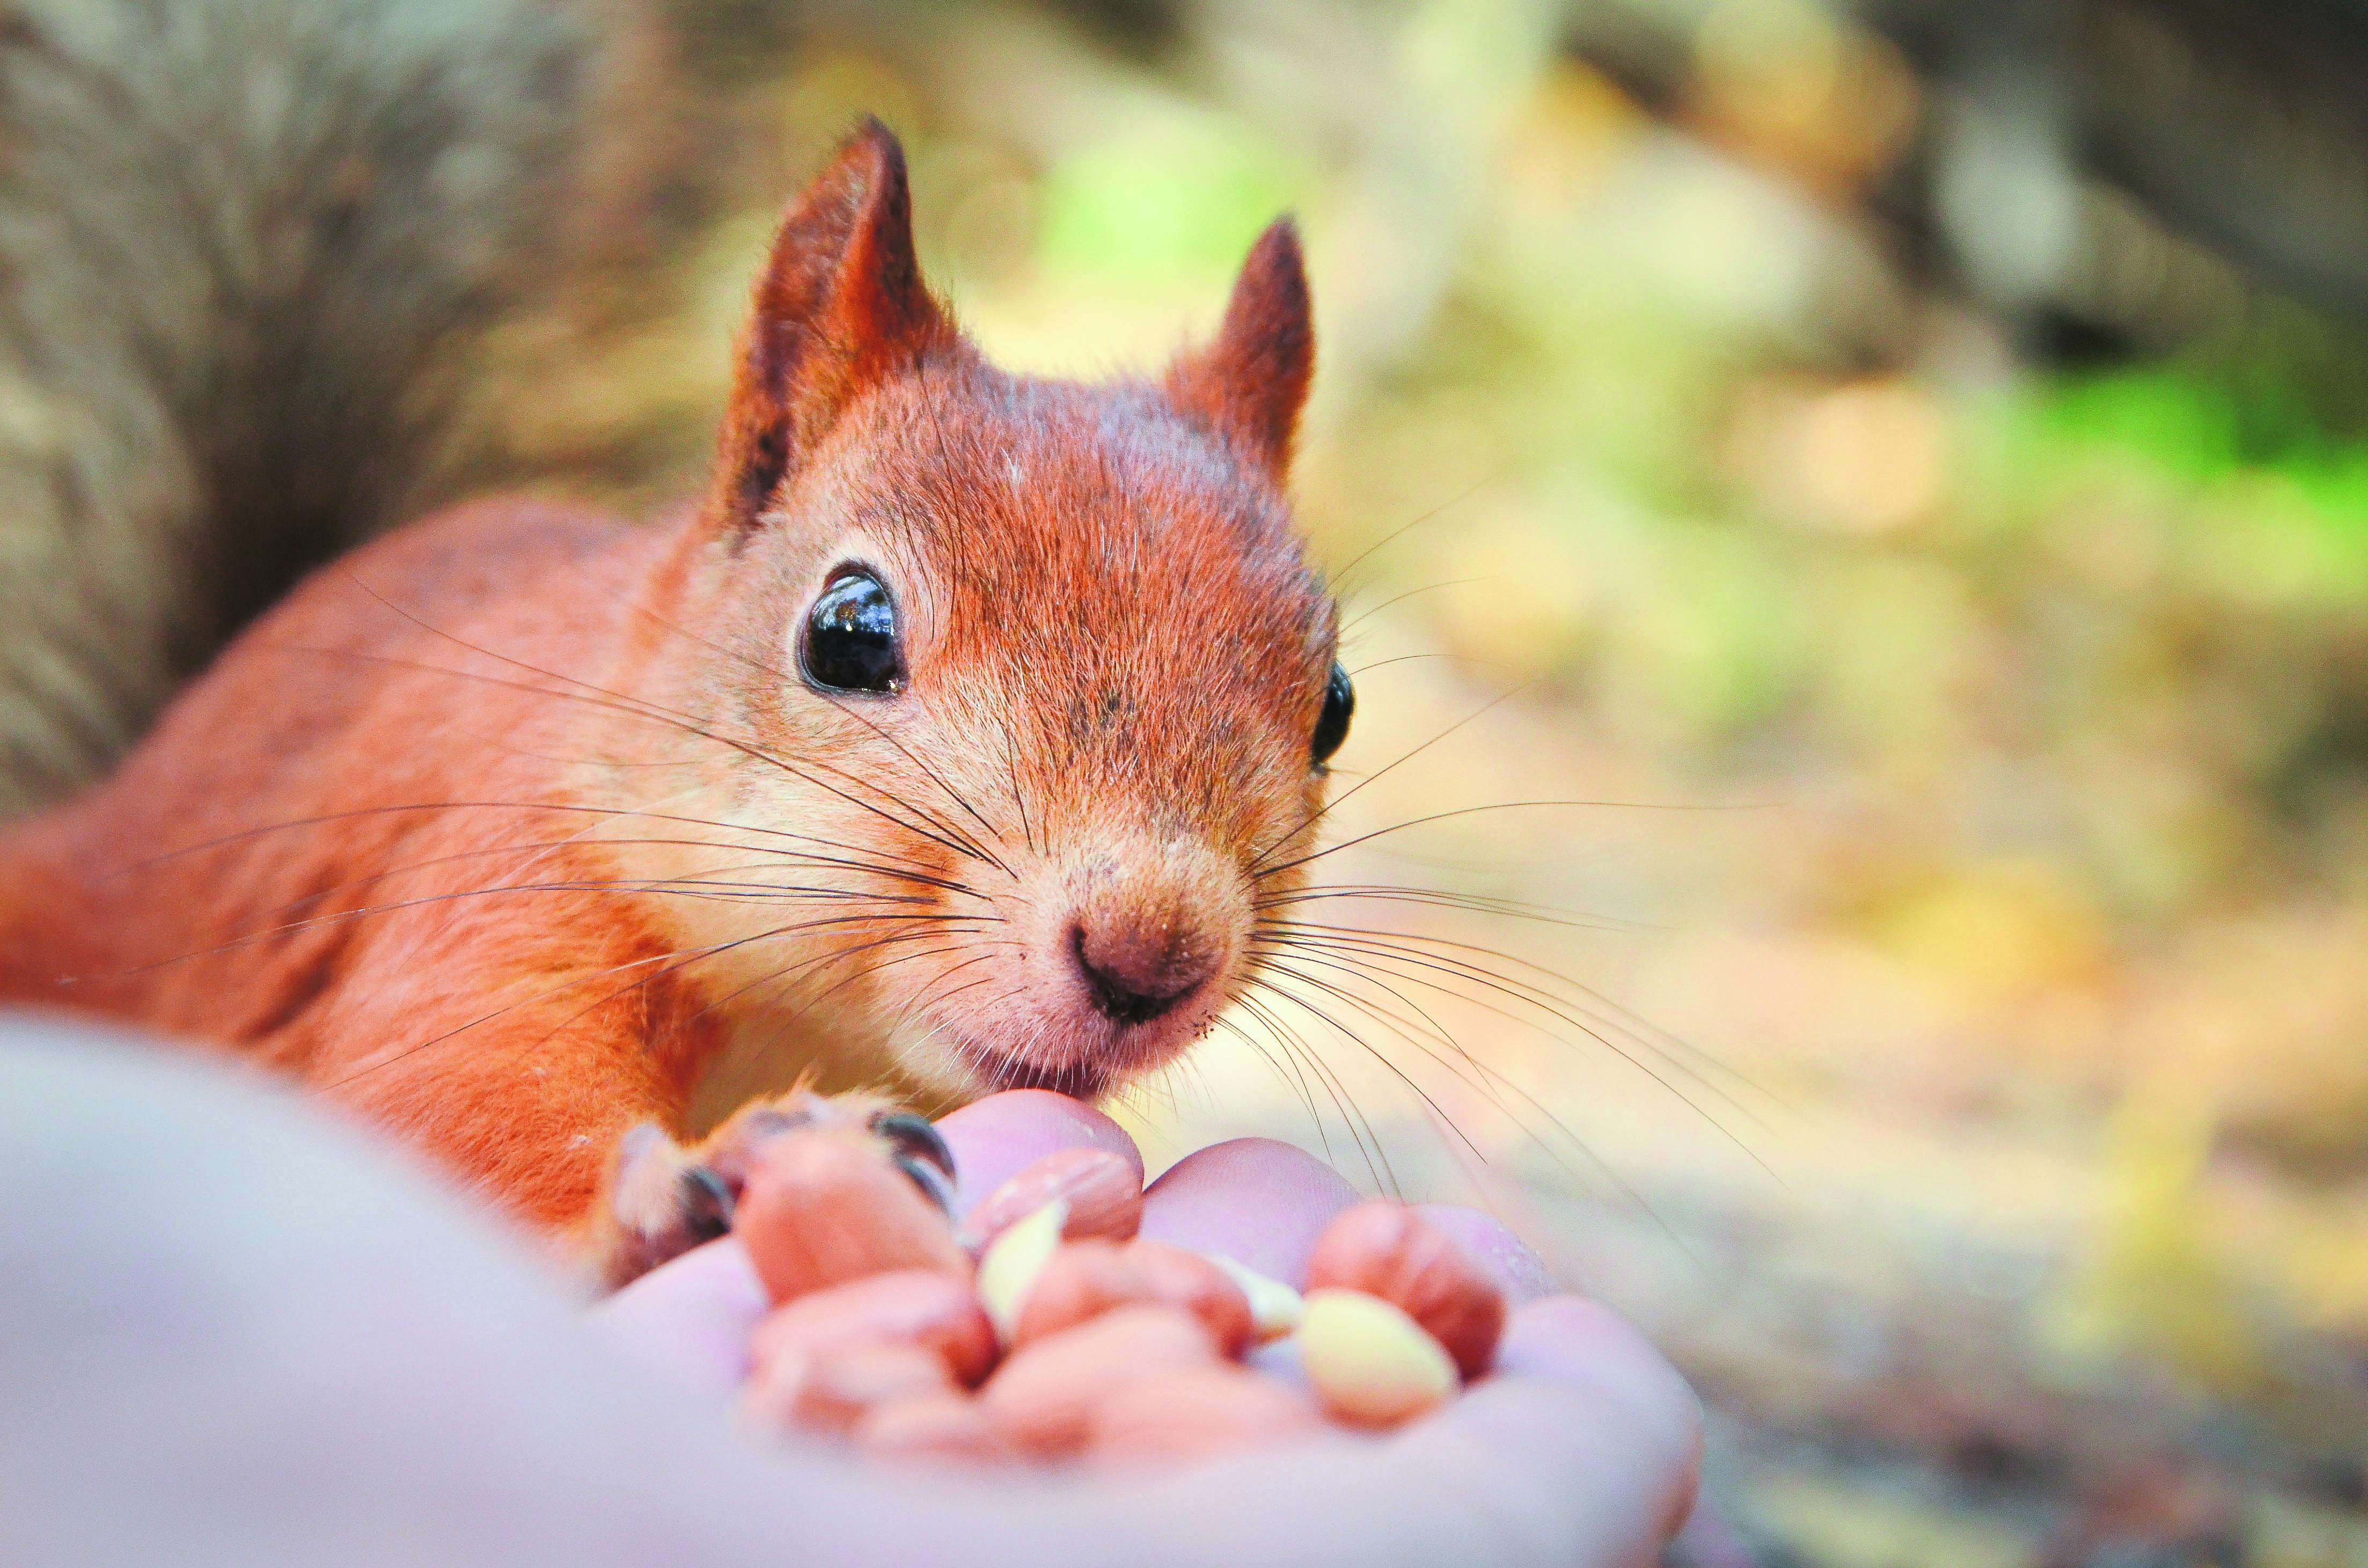 A closeup of a squirrel eating nuts from hand